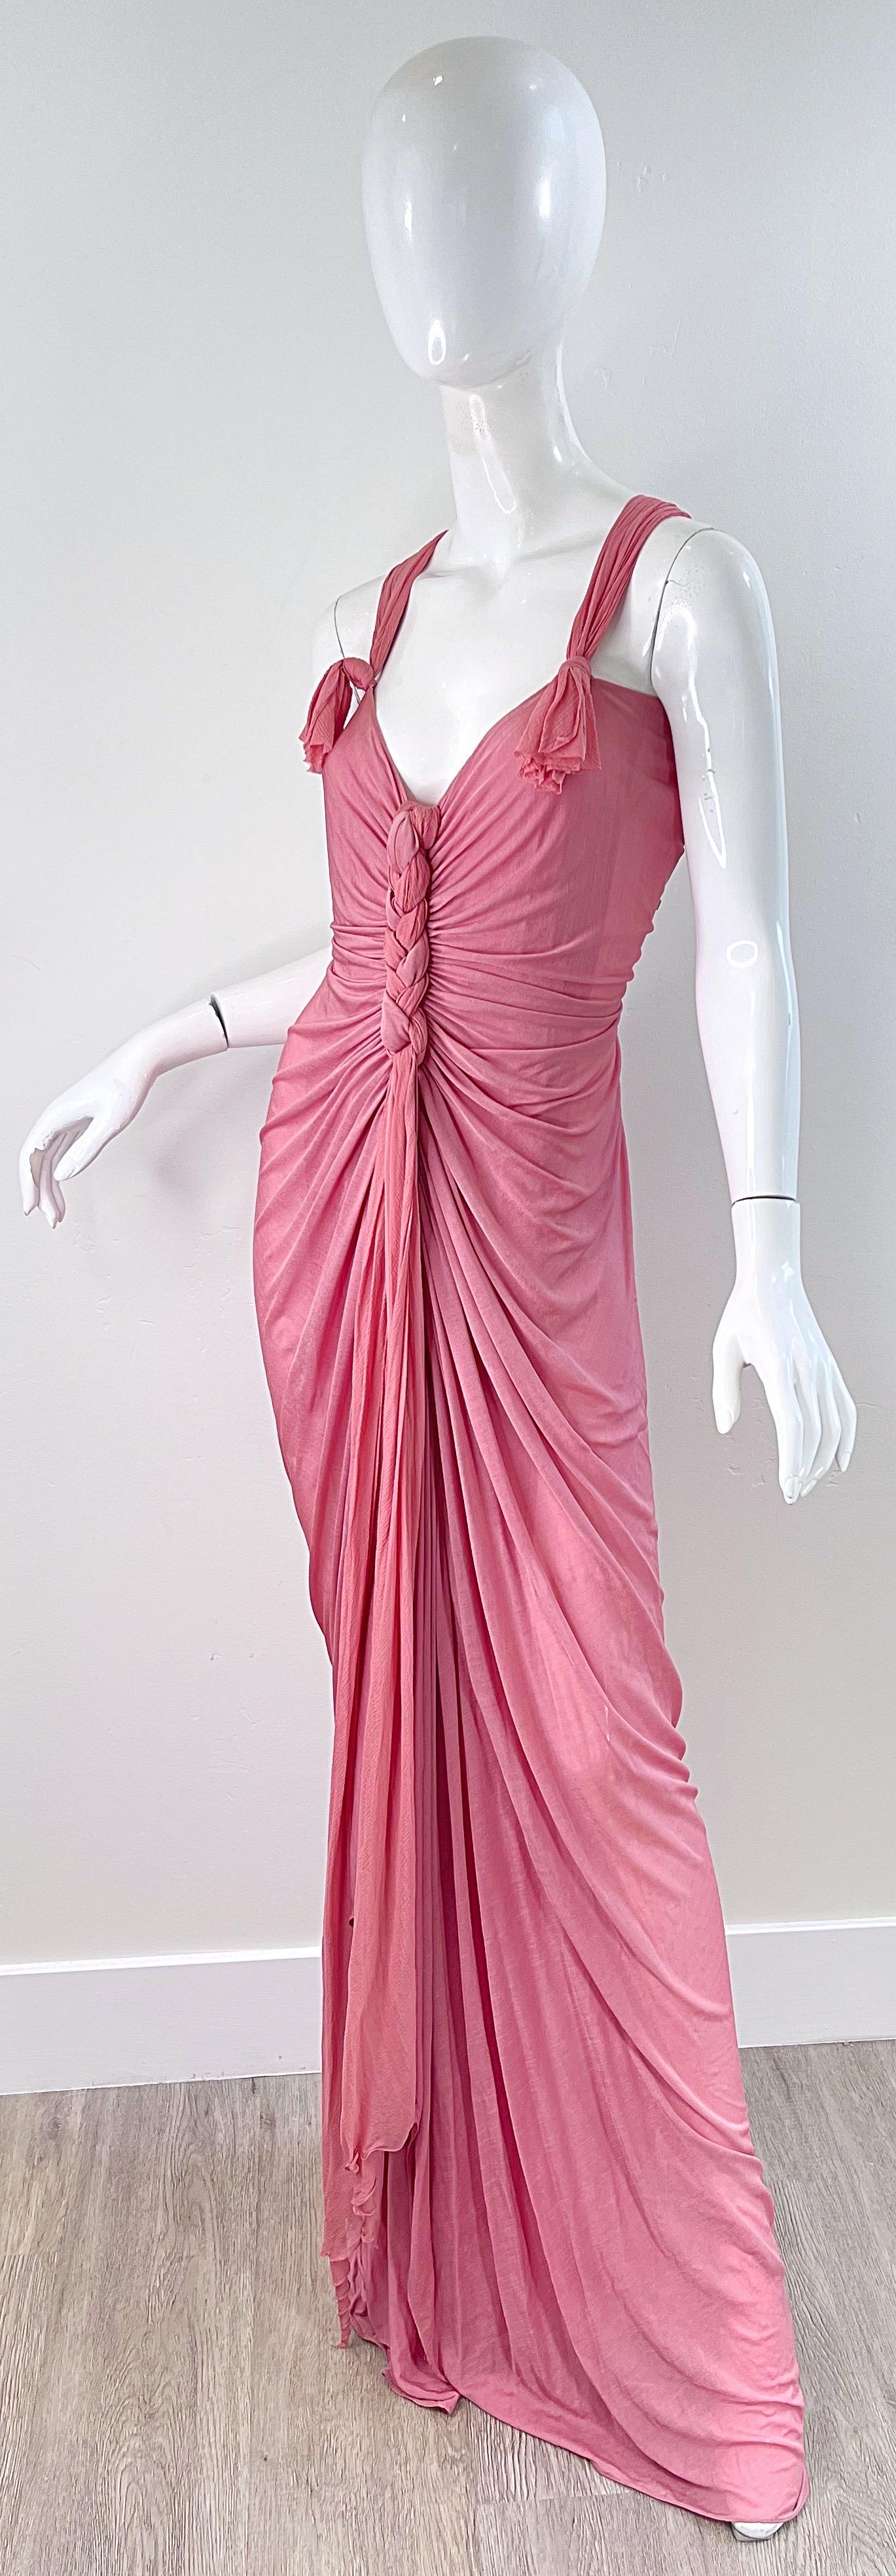 NWT Donna Karan Fall 2005 Pink Dusty Rose Mauve 30s Style Semi Sheer Gown Dress For Sale 5